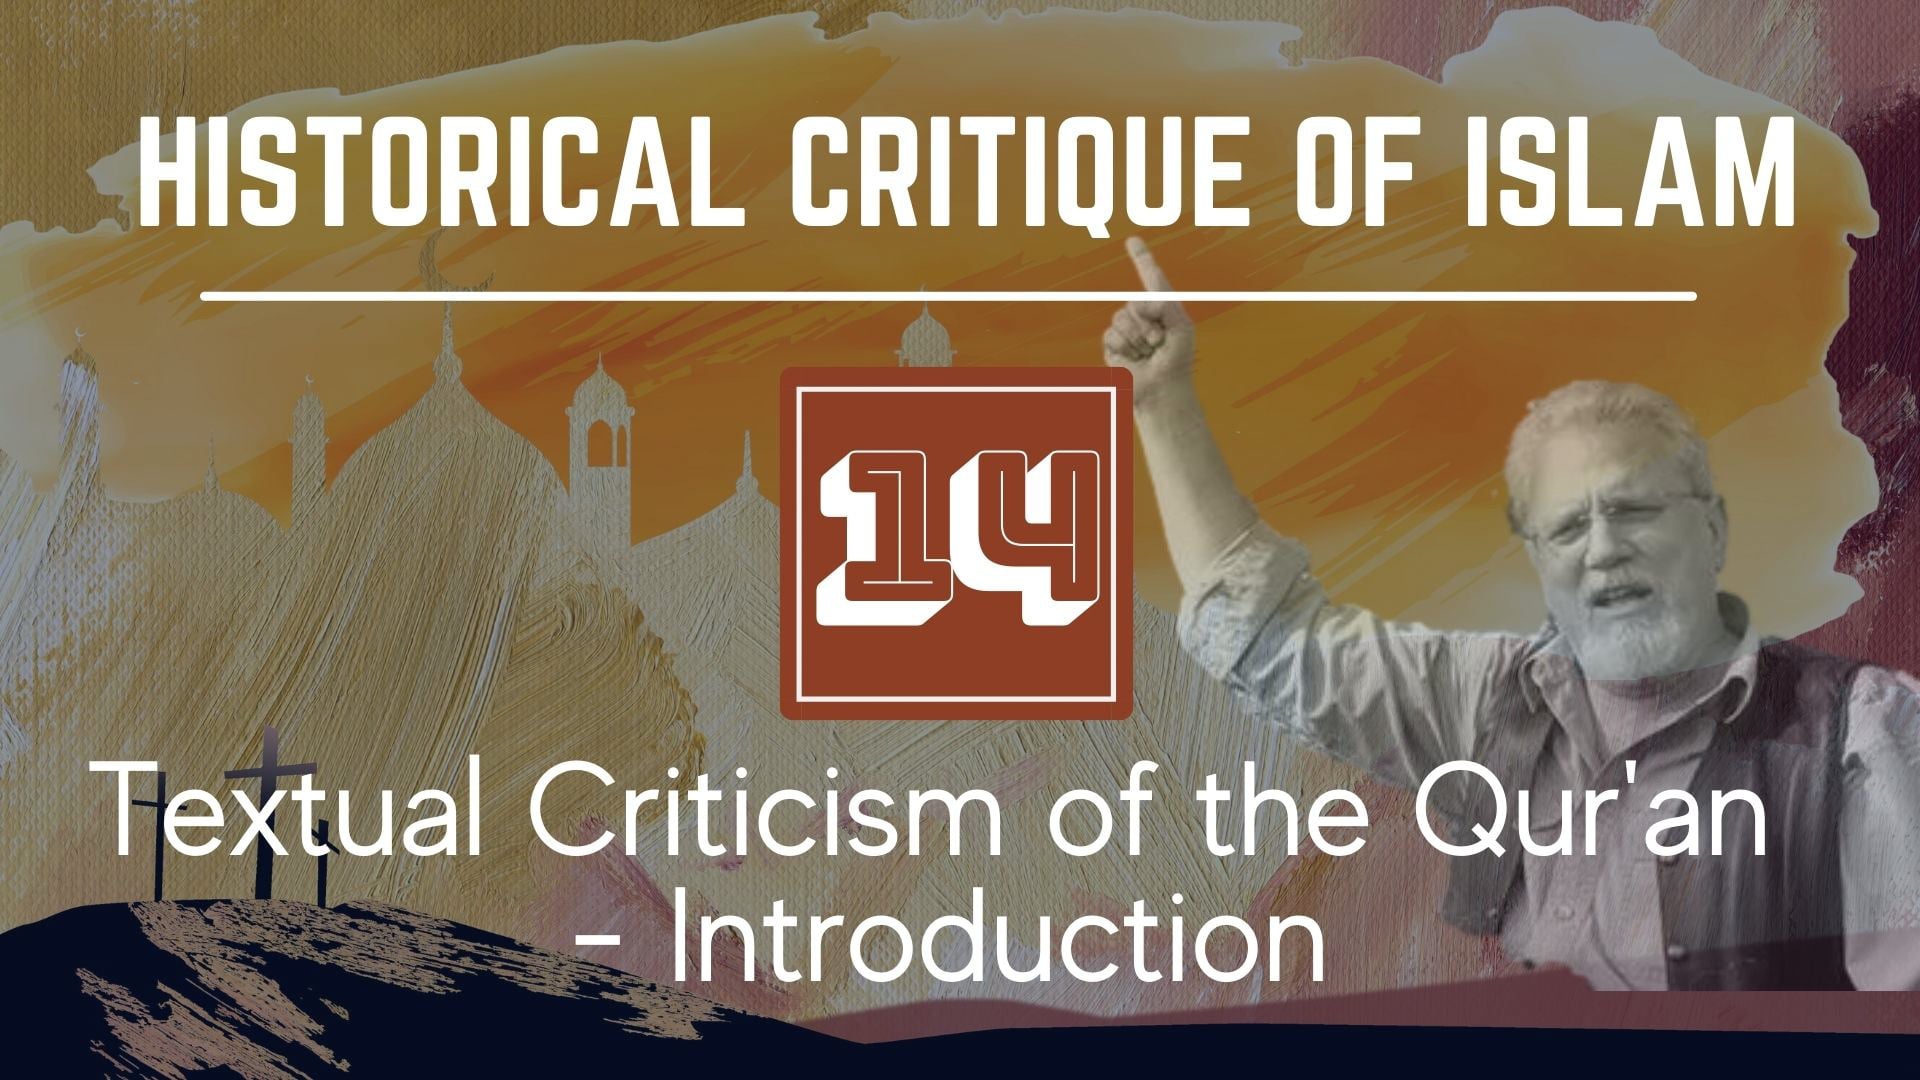 Historical Critique of Islam – Textual Criticism of the Qur’an – Introduction